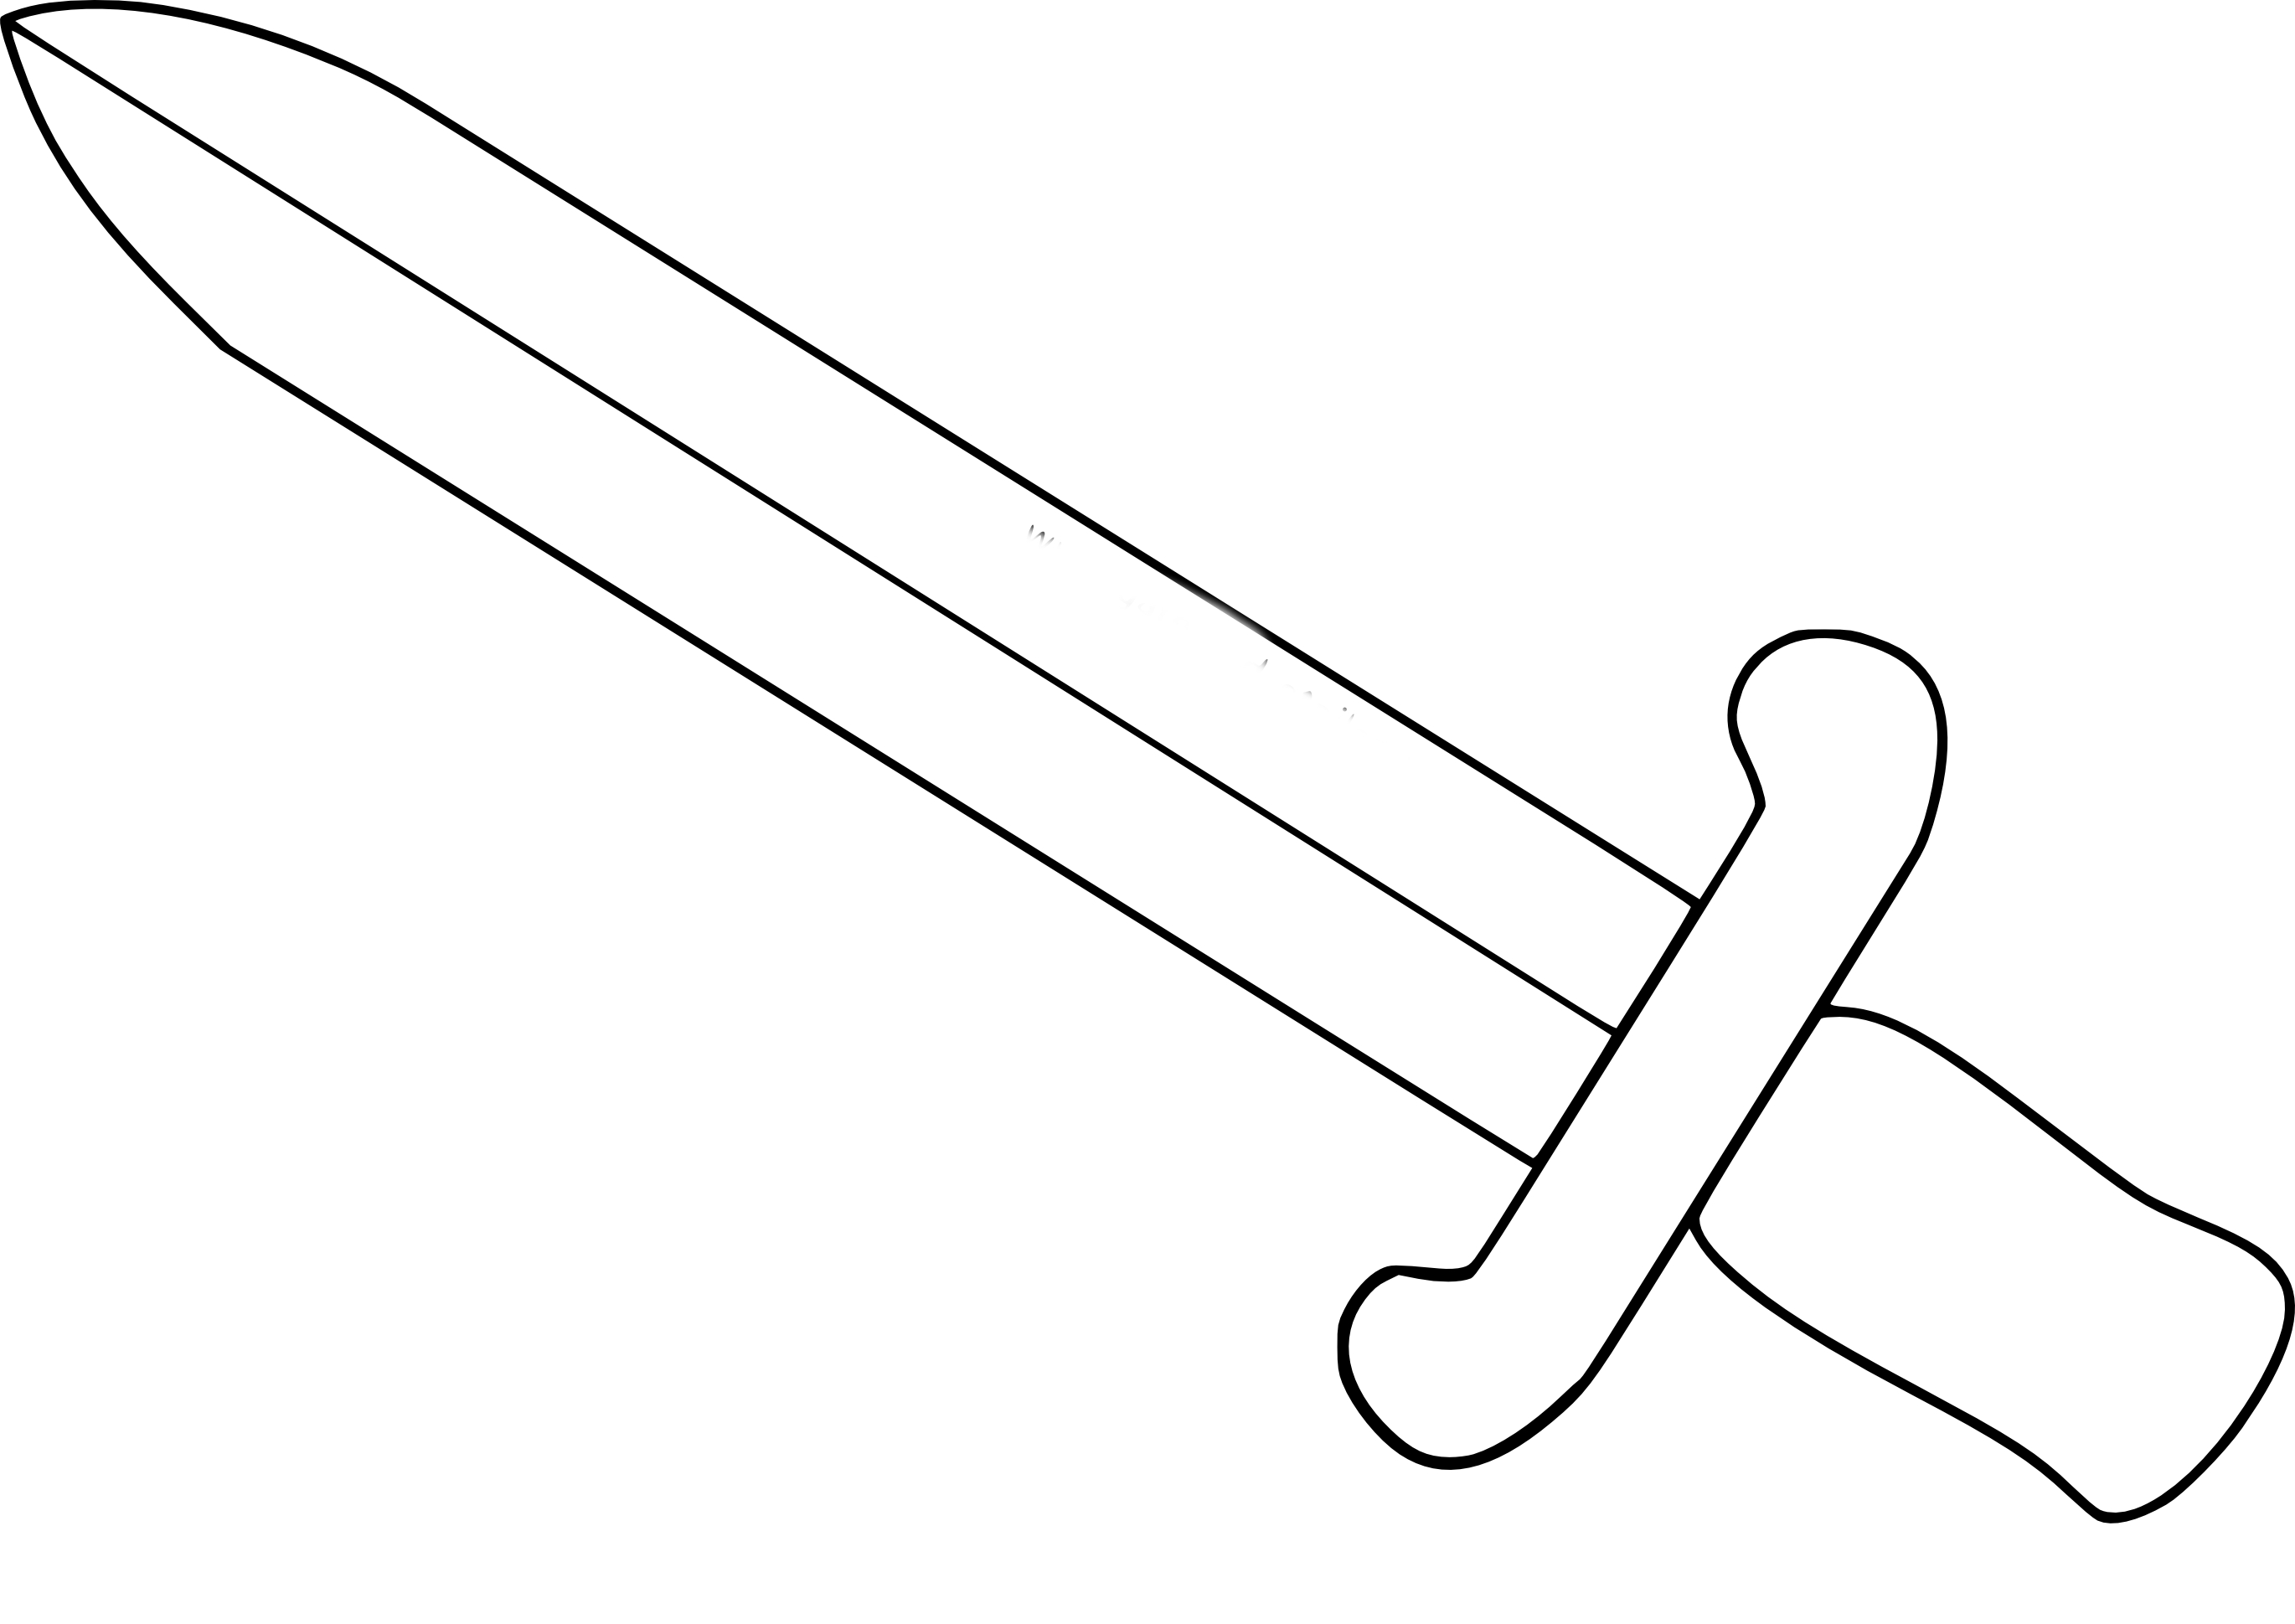 Sword drawing and coloring page